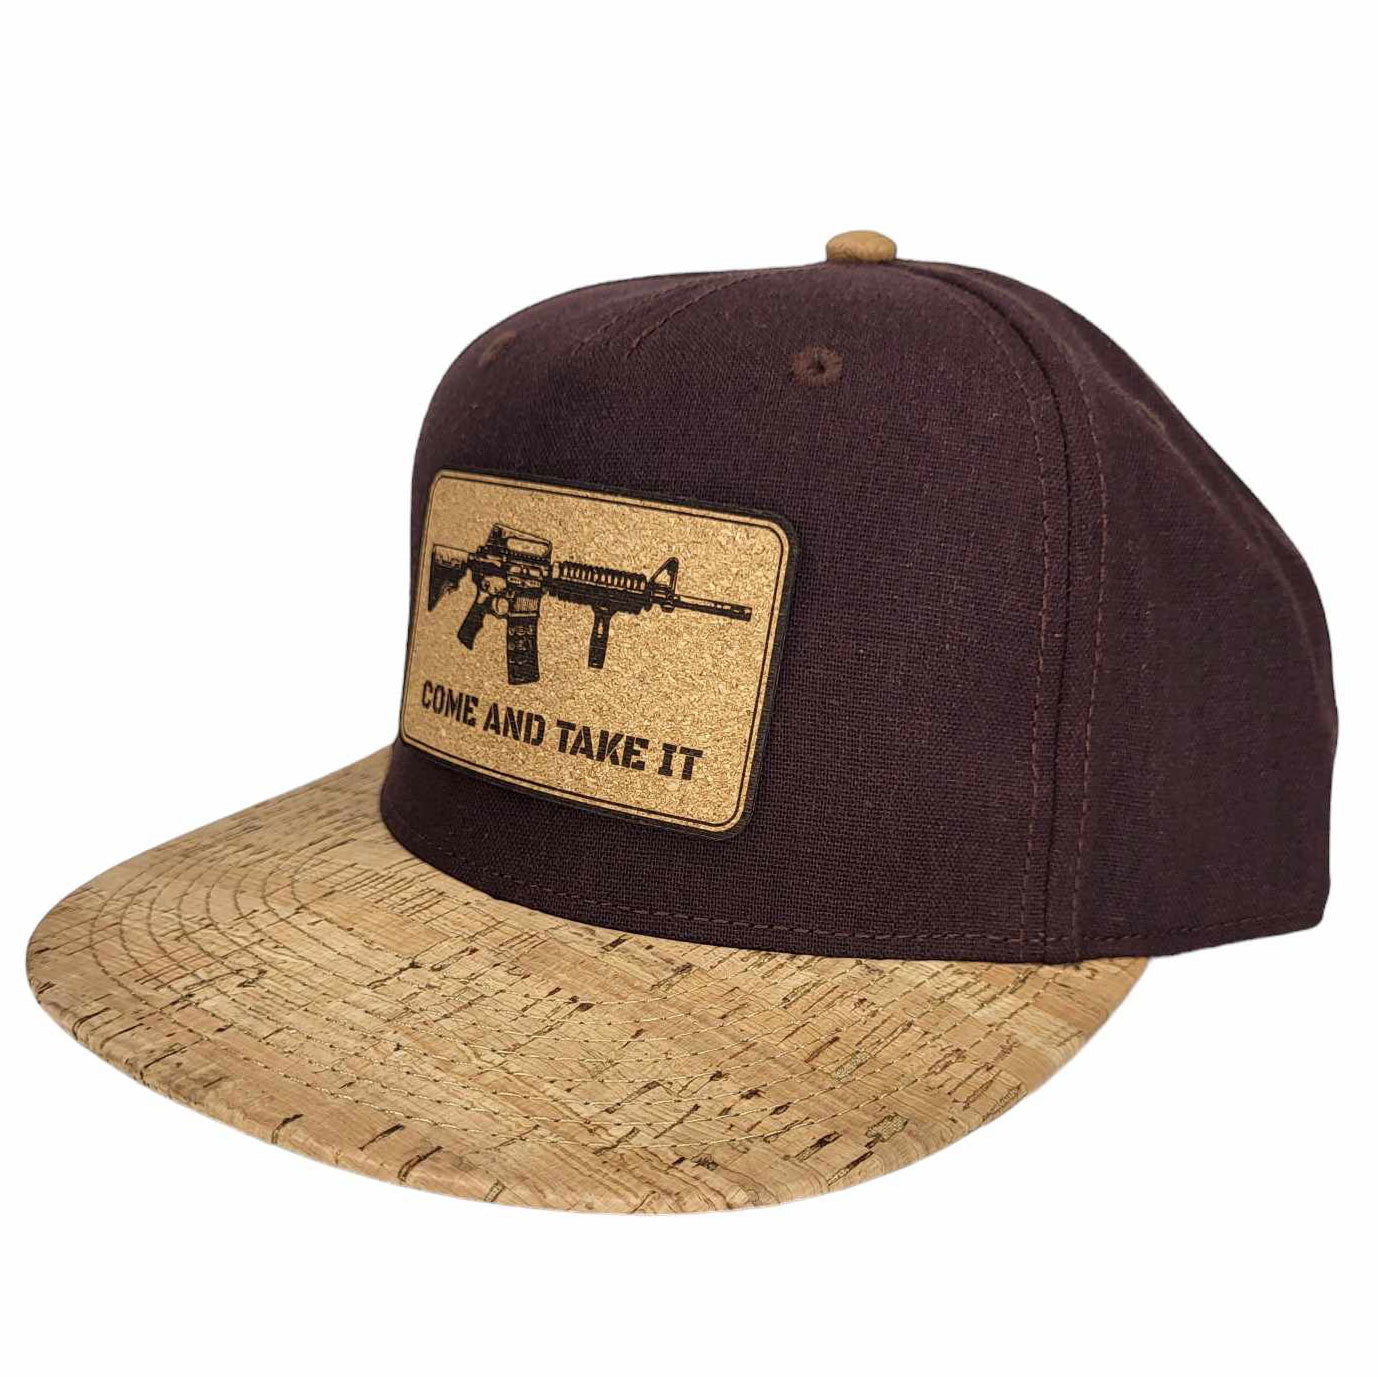 Come And Take It Cork Hat